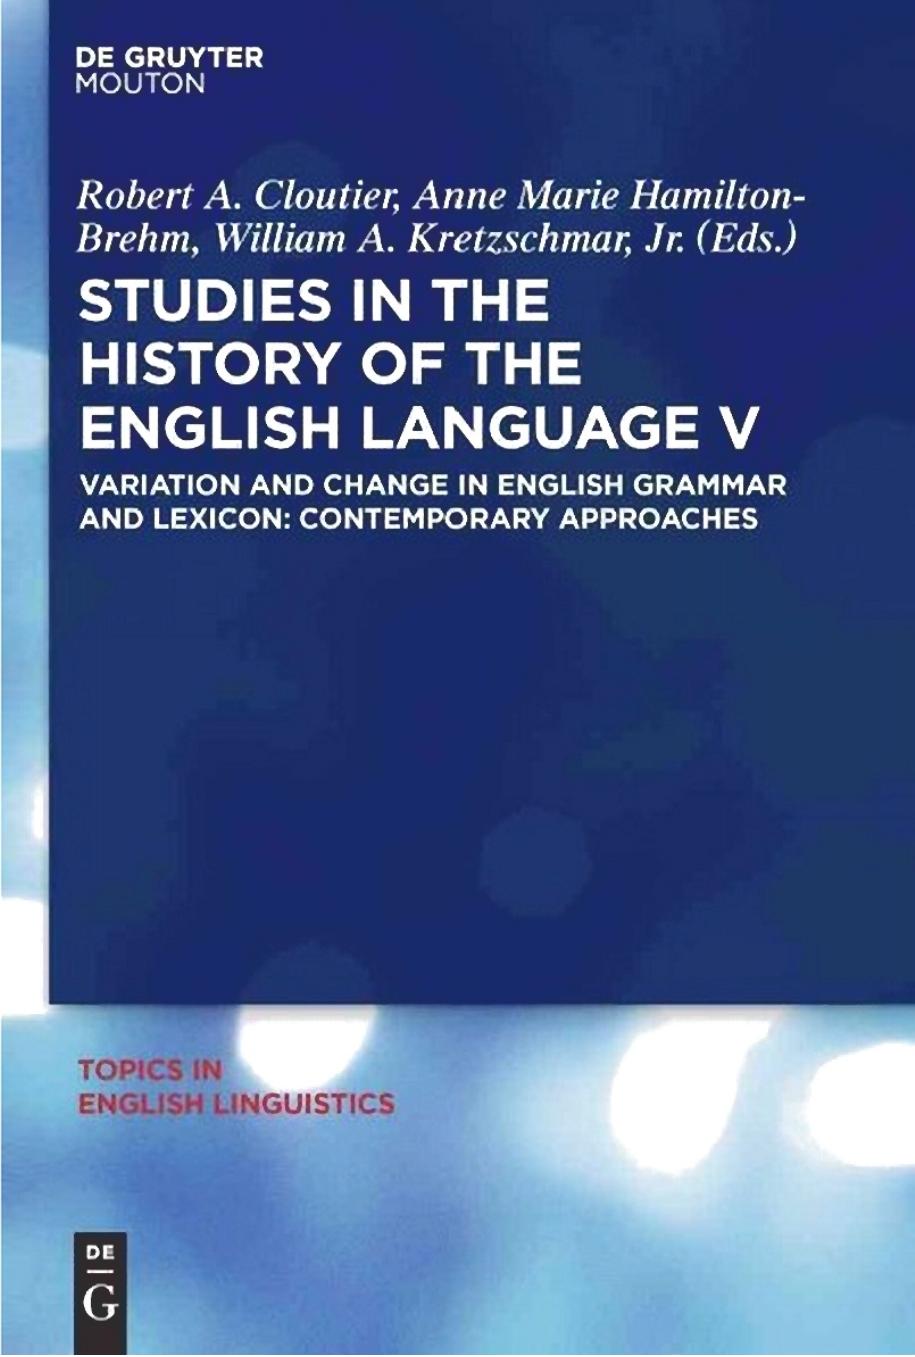 Studies in the History of the English Language V: Variation and Change in English Grammar and Lexicon : Contemporary Approaches